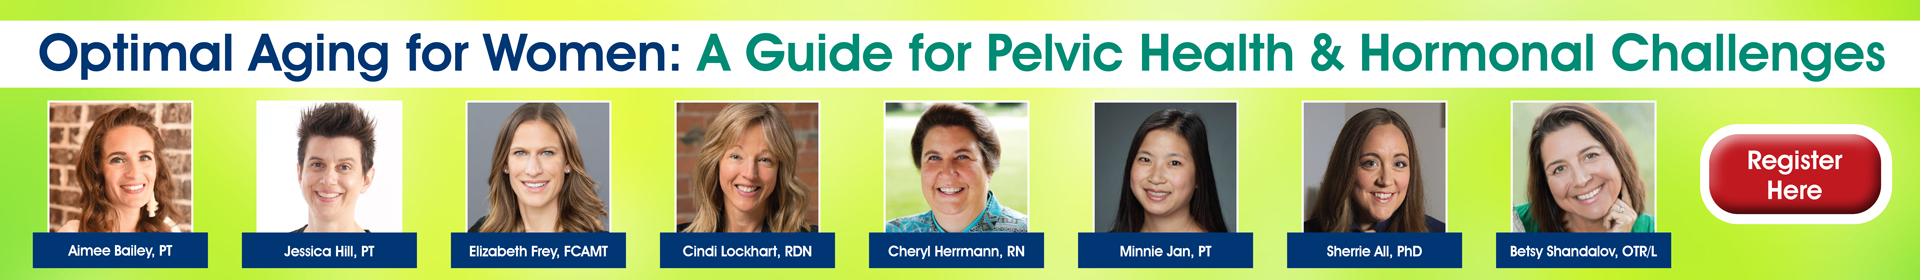 Optimal Aging for Women: A Guide for Pelvic Health & Hormonal Challenges